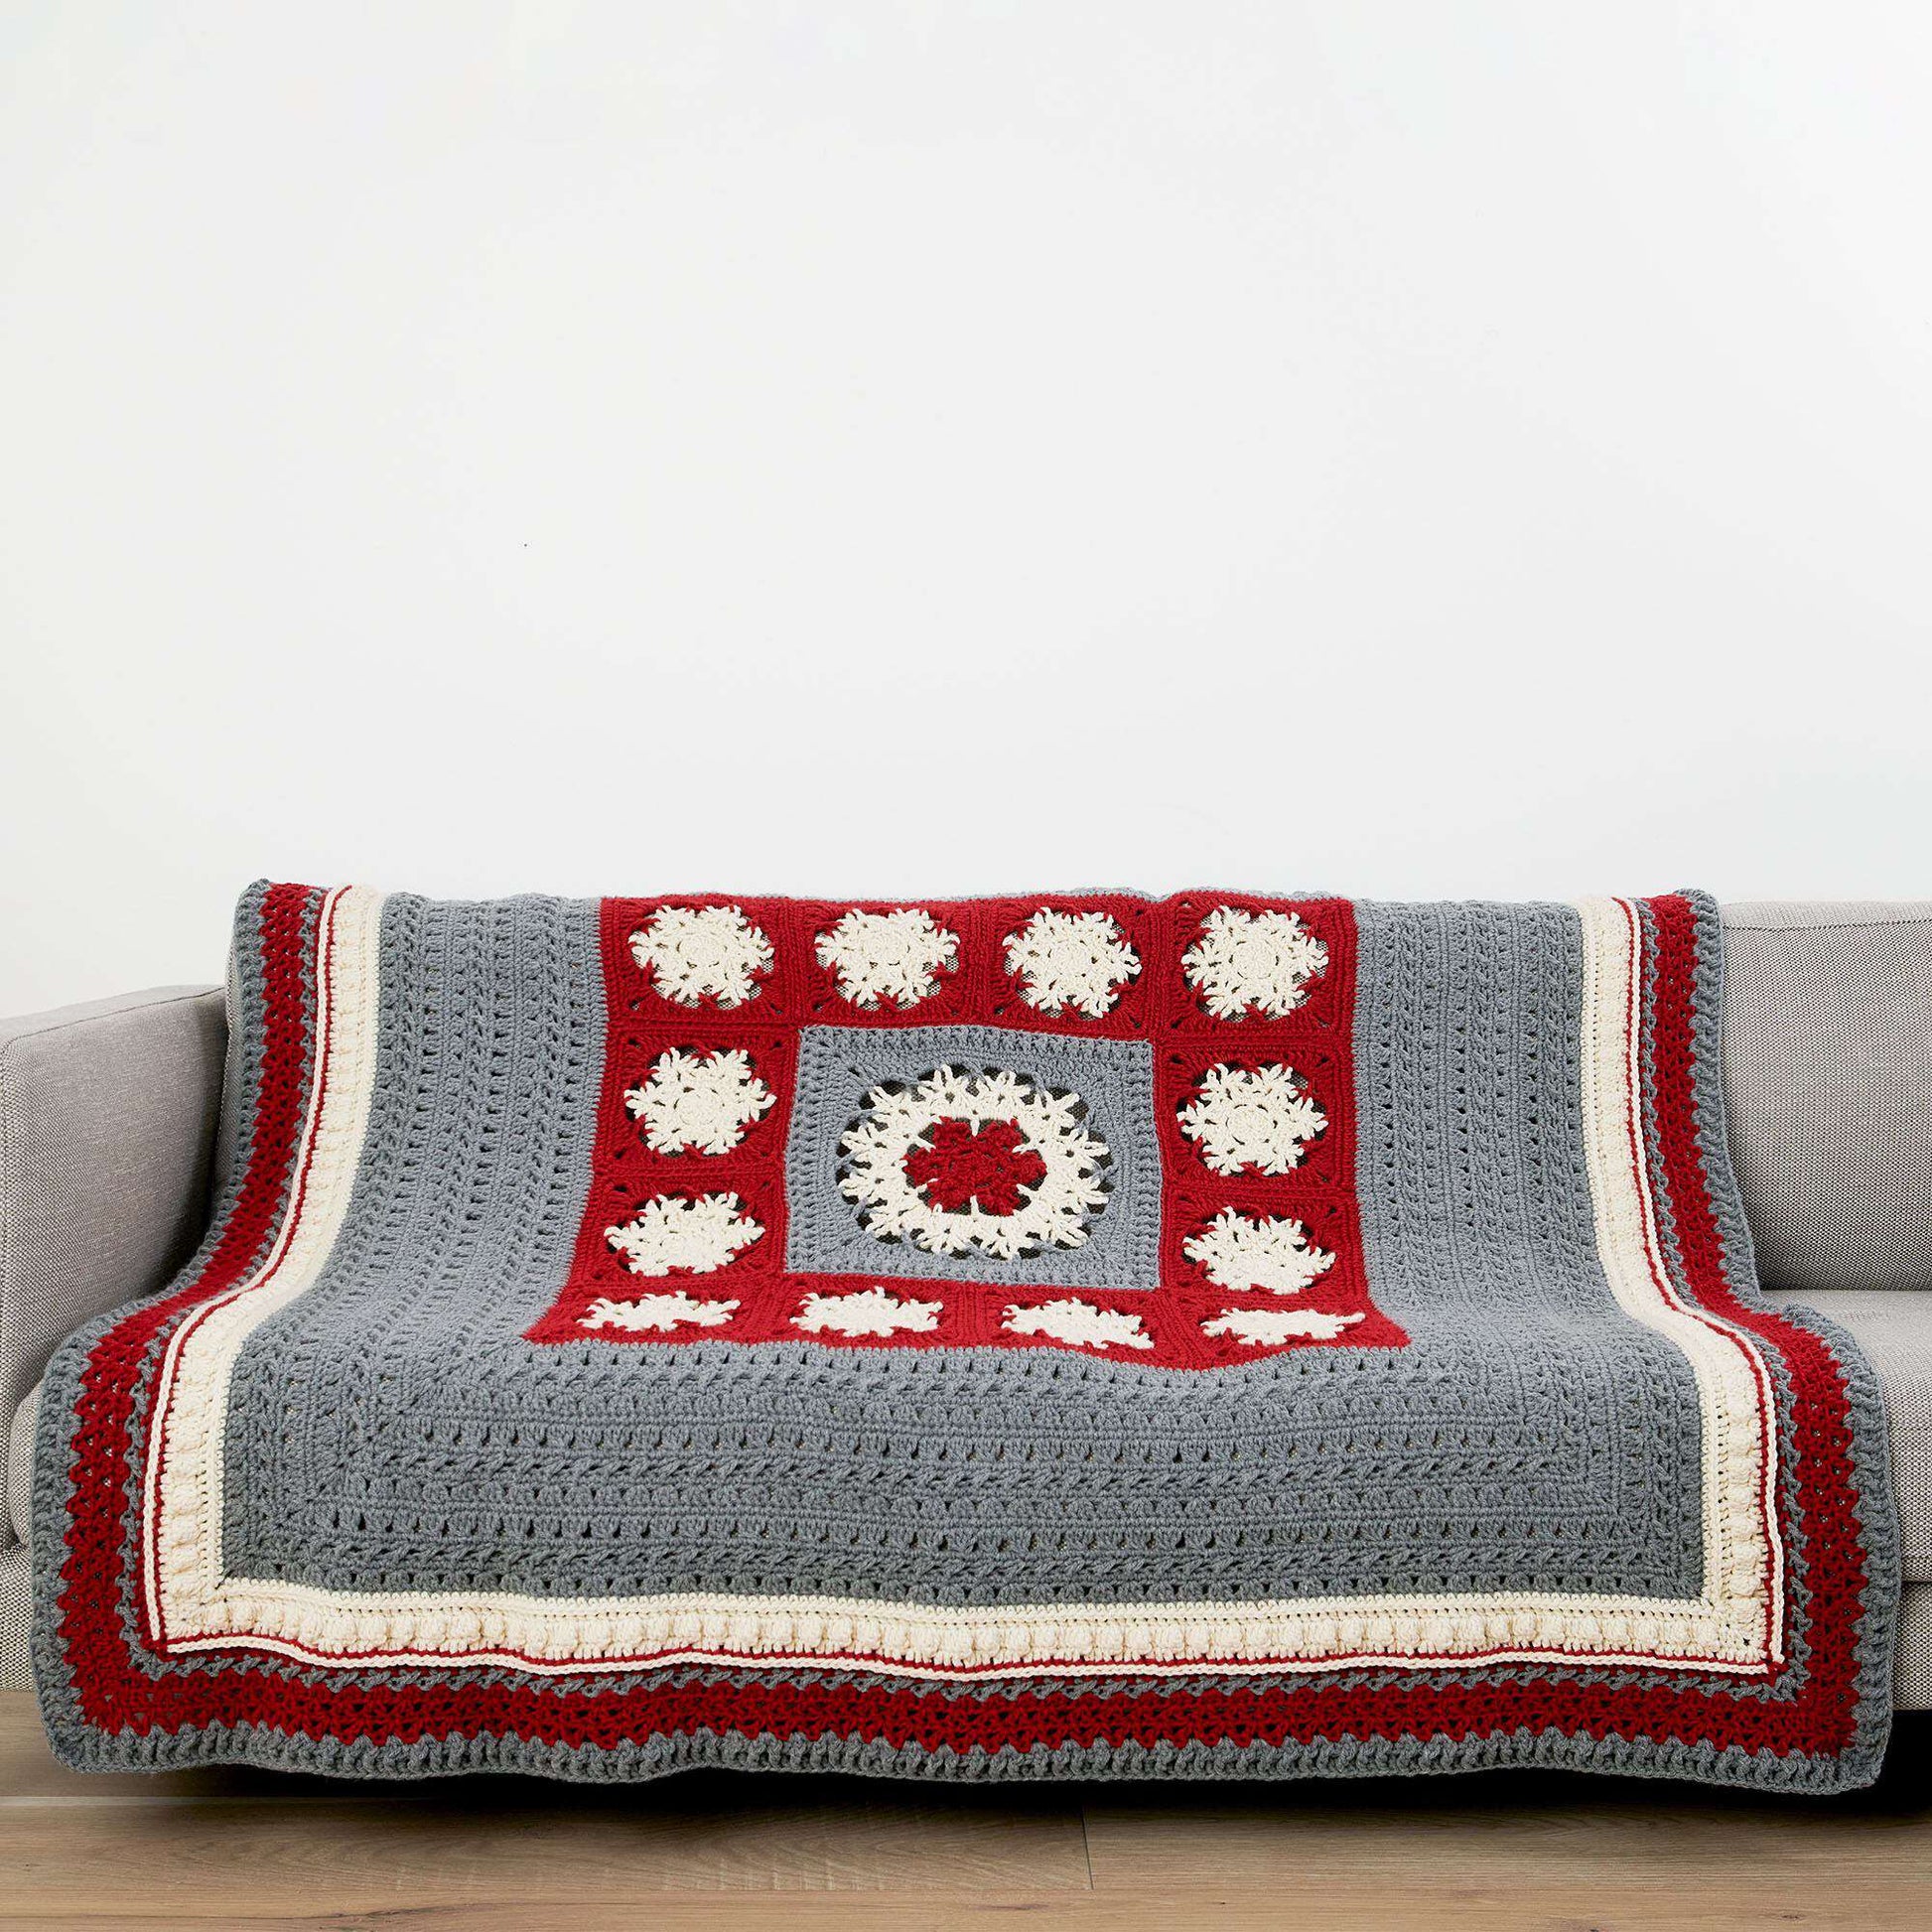 Free Caron Snow Days With Hot Chocolate Crochet Blanket Pattern